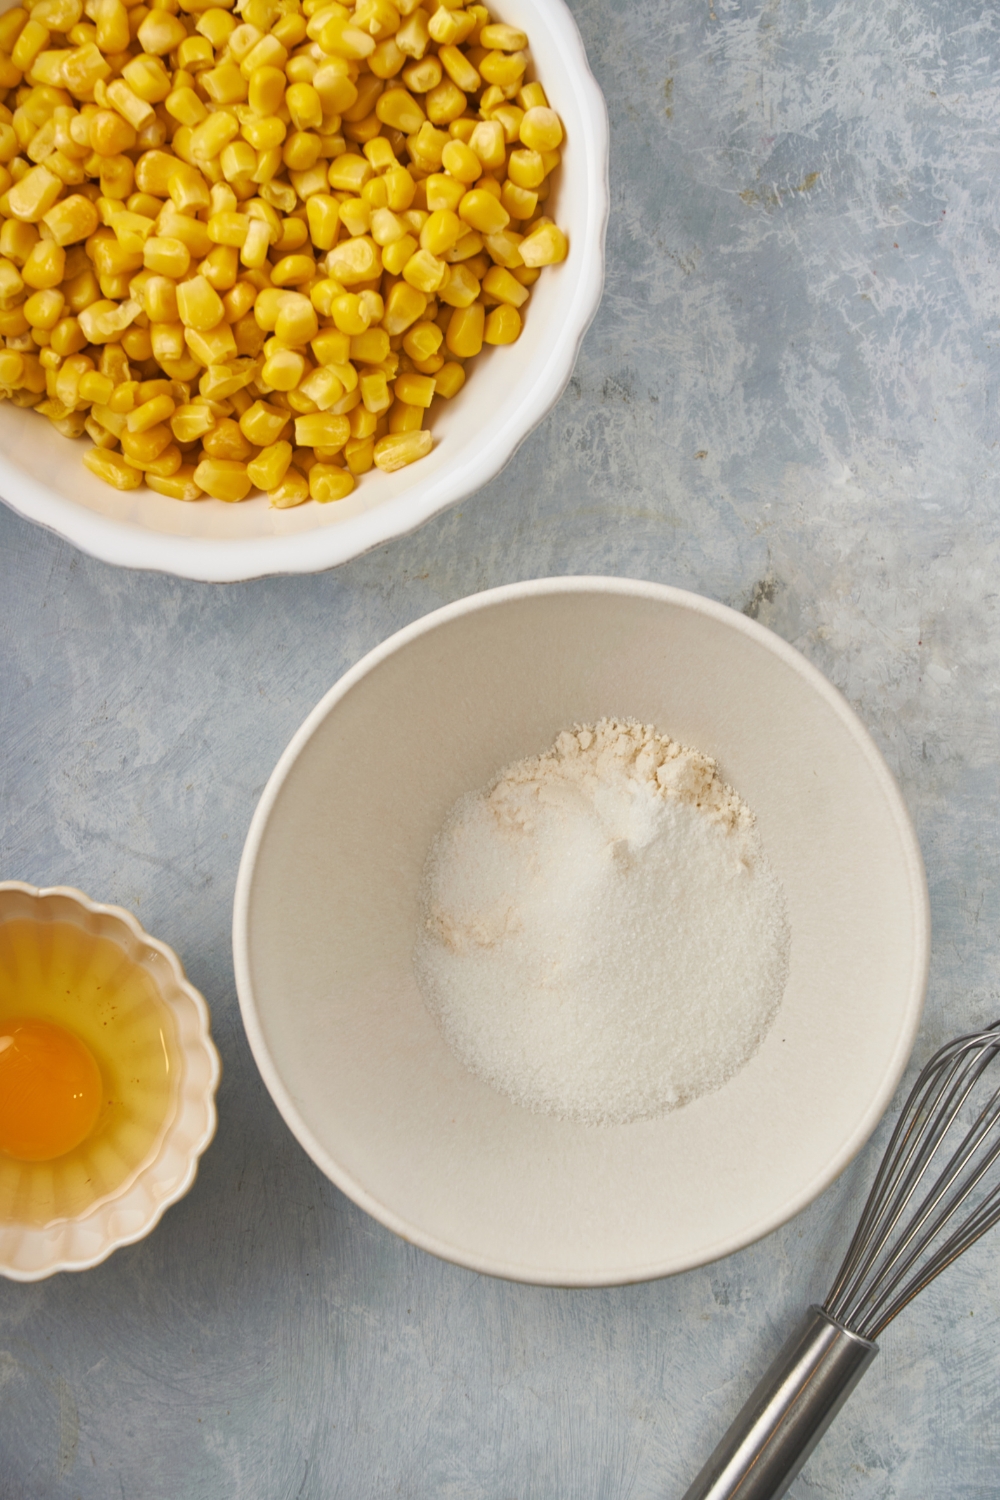 A white bowl with flour and sugar added but not mixed together. Surrounding the bowl is a whisk, an unbeaten egg, and a bowl of corn.